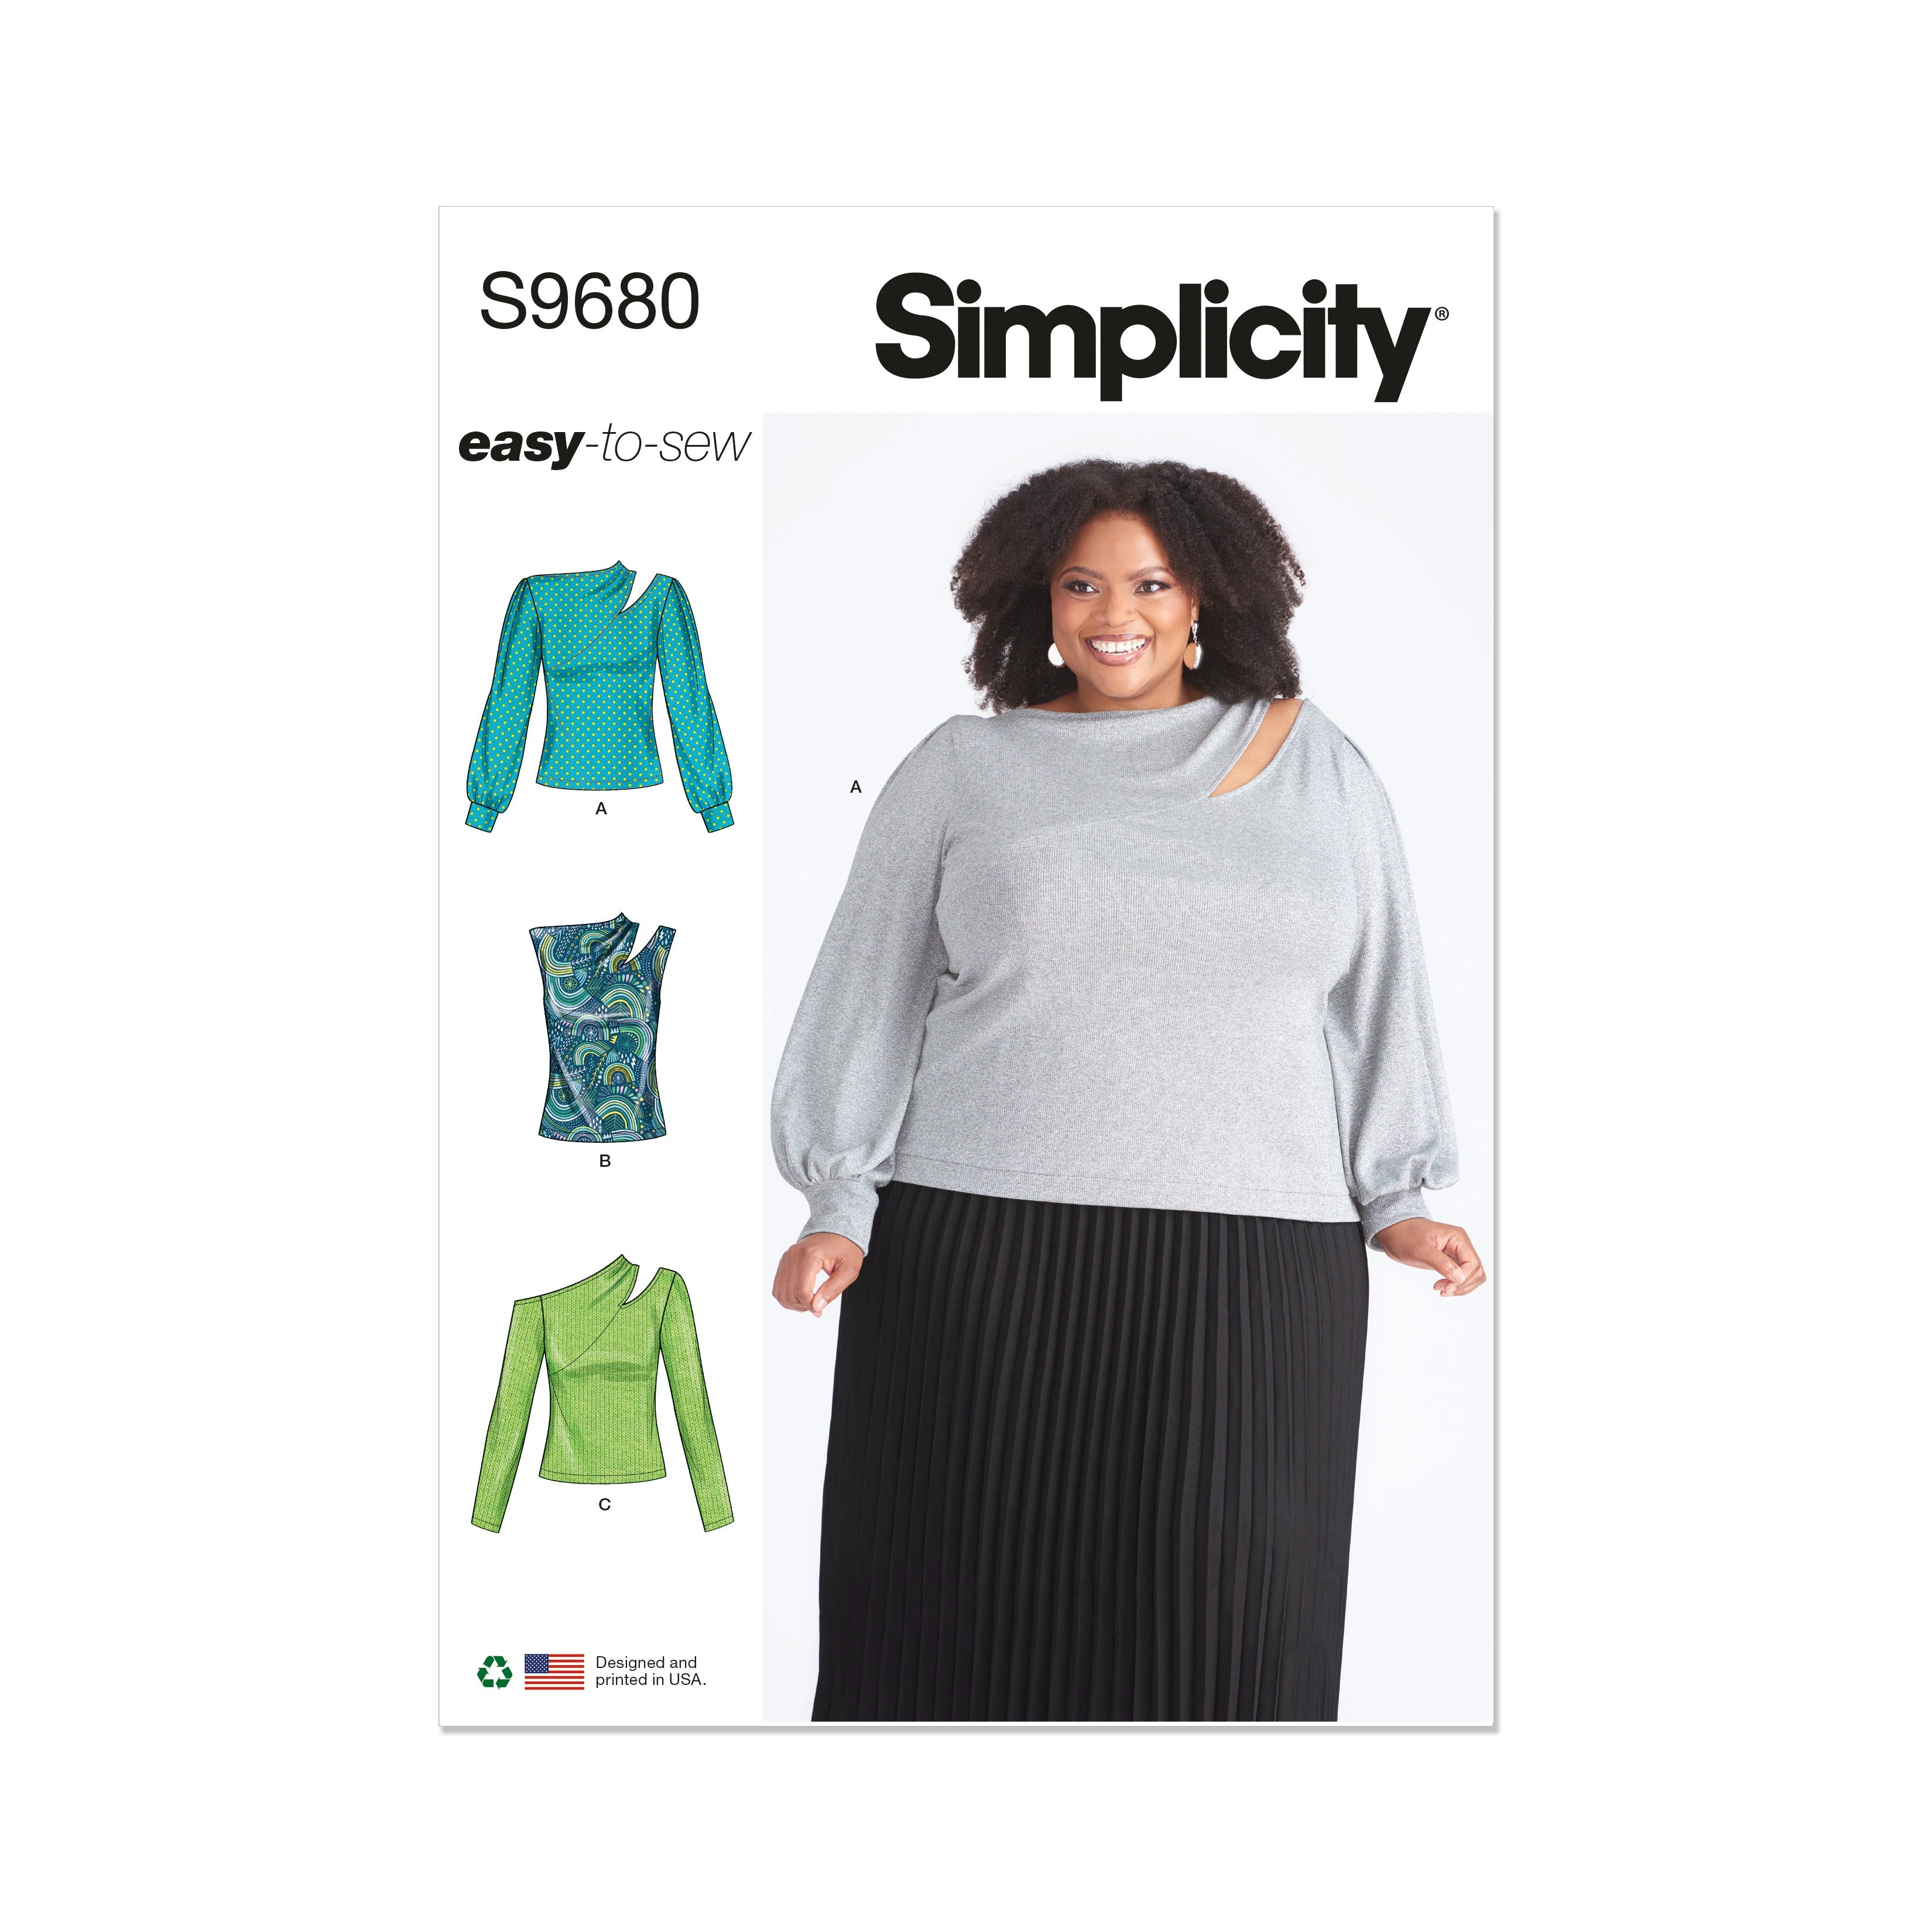 Simplicity pattern 9680 Women's Knit Top with Sleeve Variations from Jaycotts Sewing Supplies